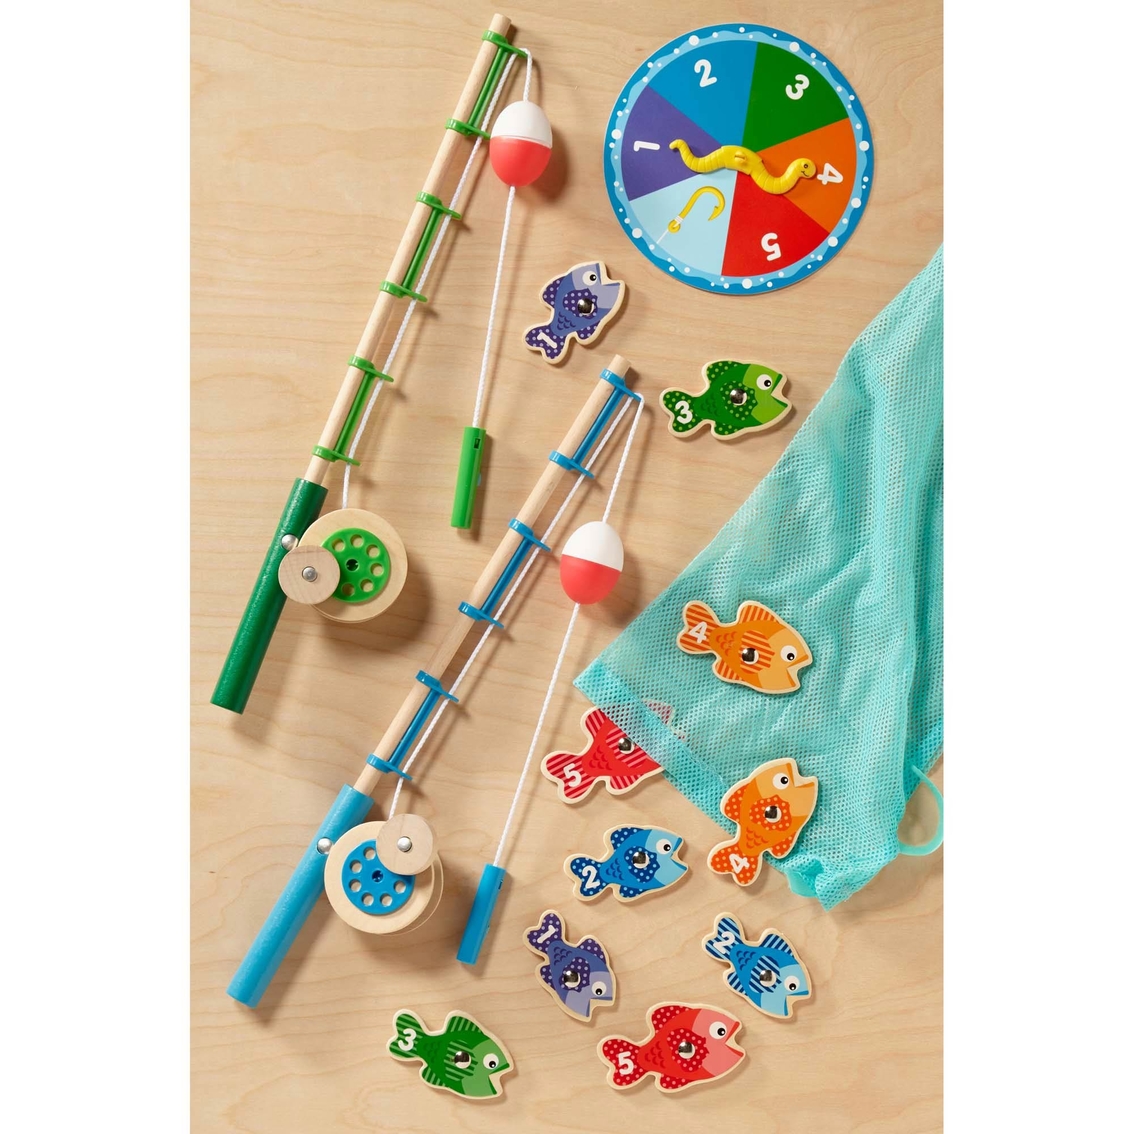 Melissa & Doug Catch and Count Fishing Game - Image 3 of 5